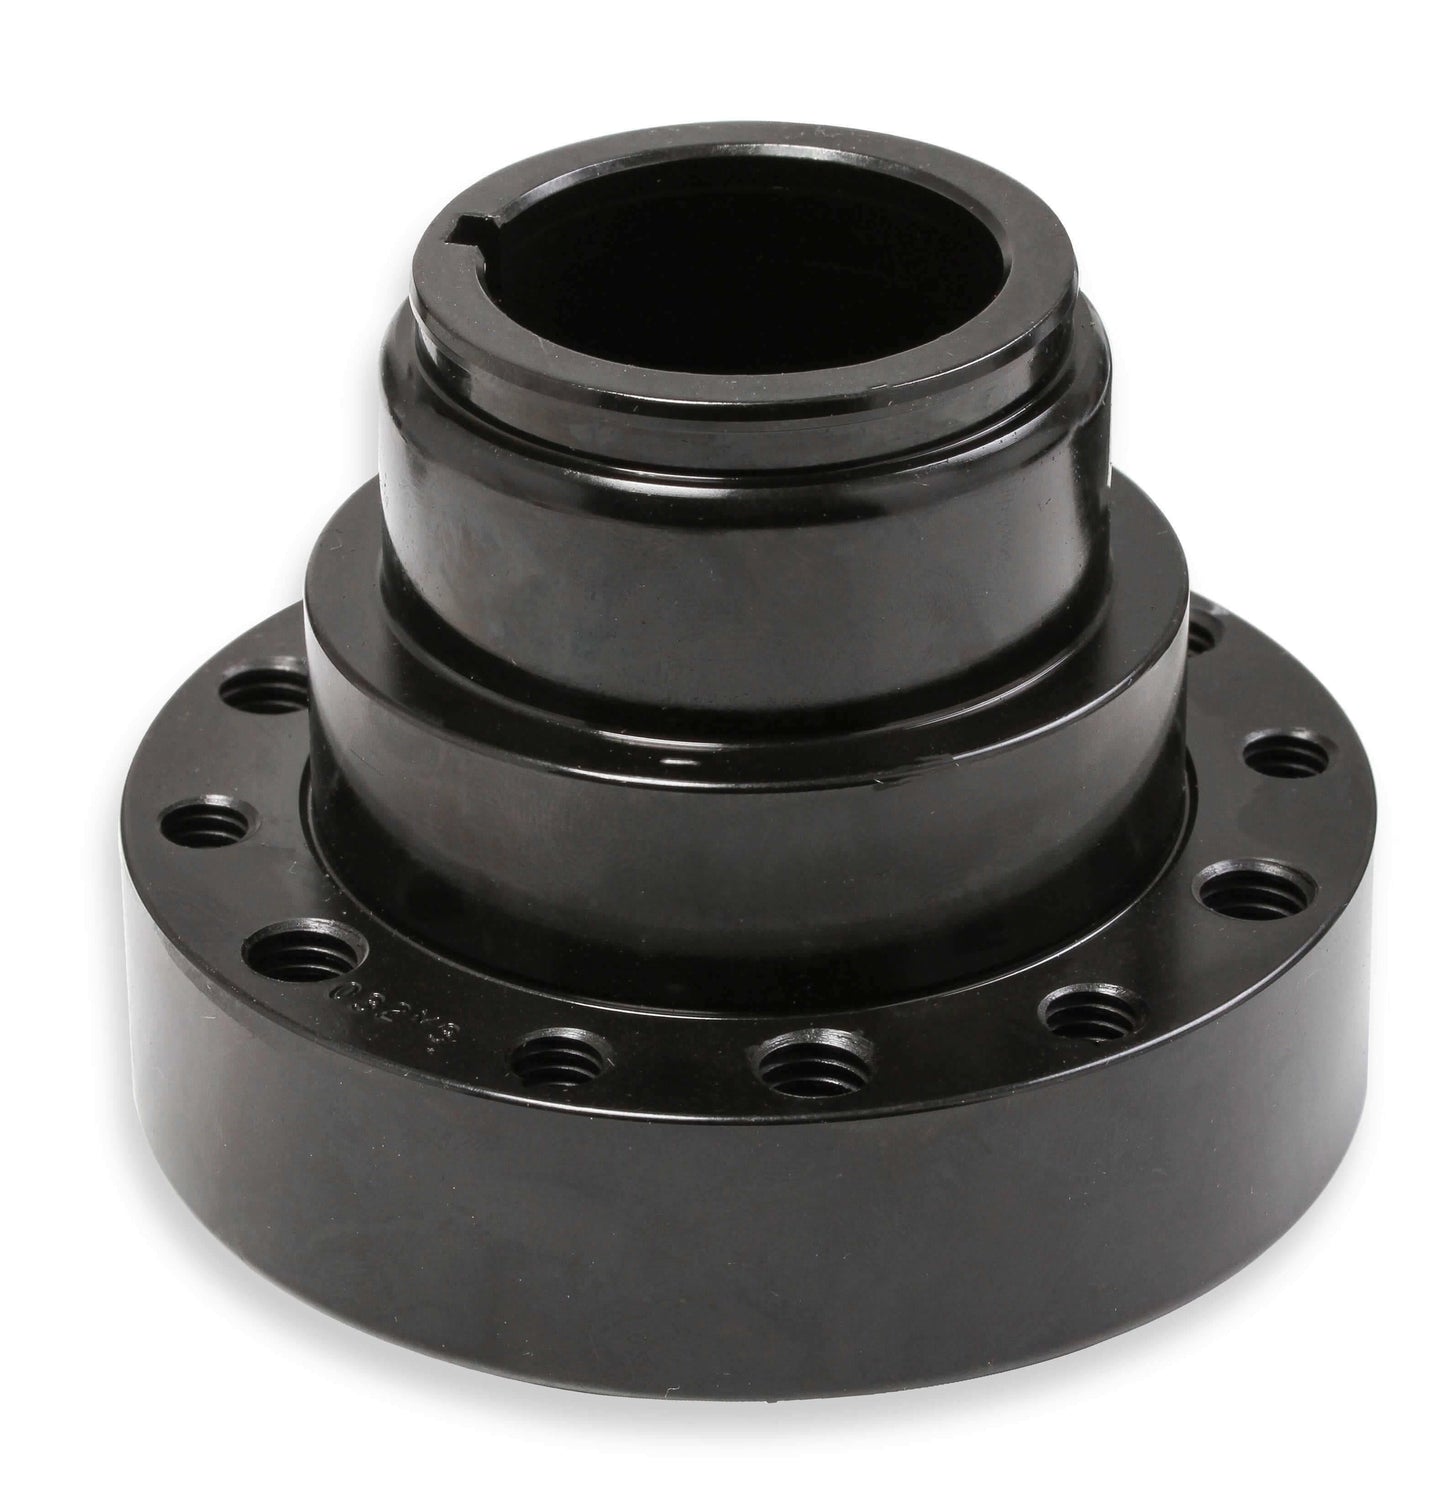 Replacement DAMPER/HUB Assembly - 97-192